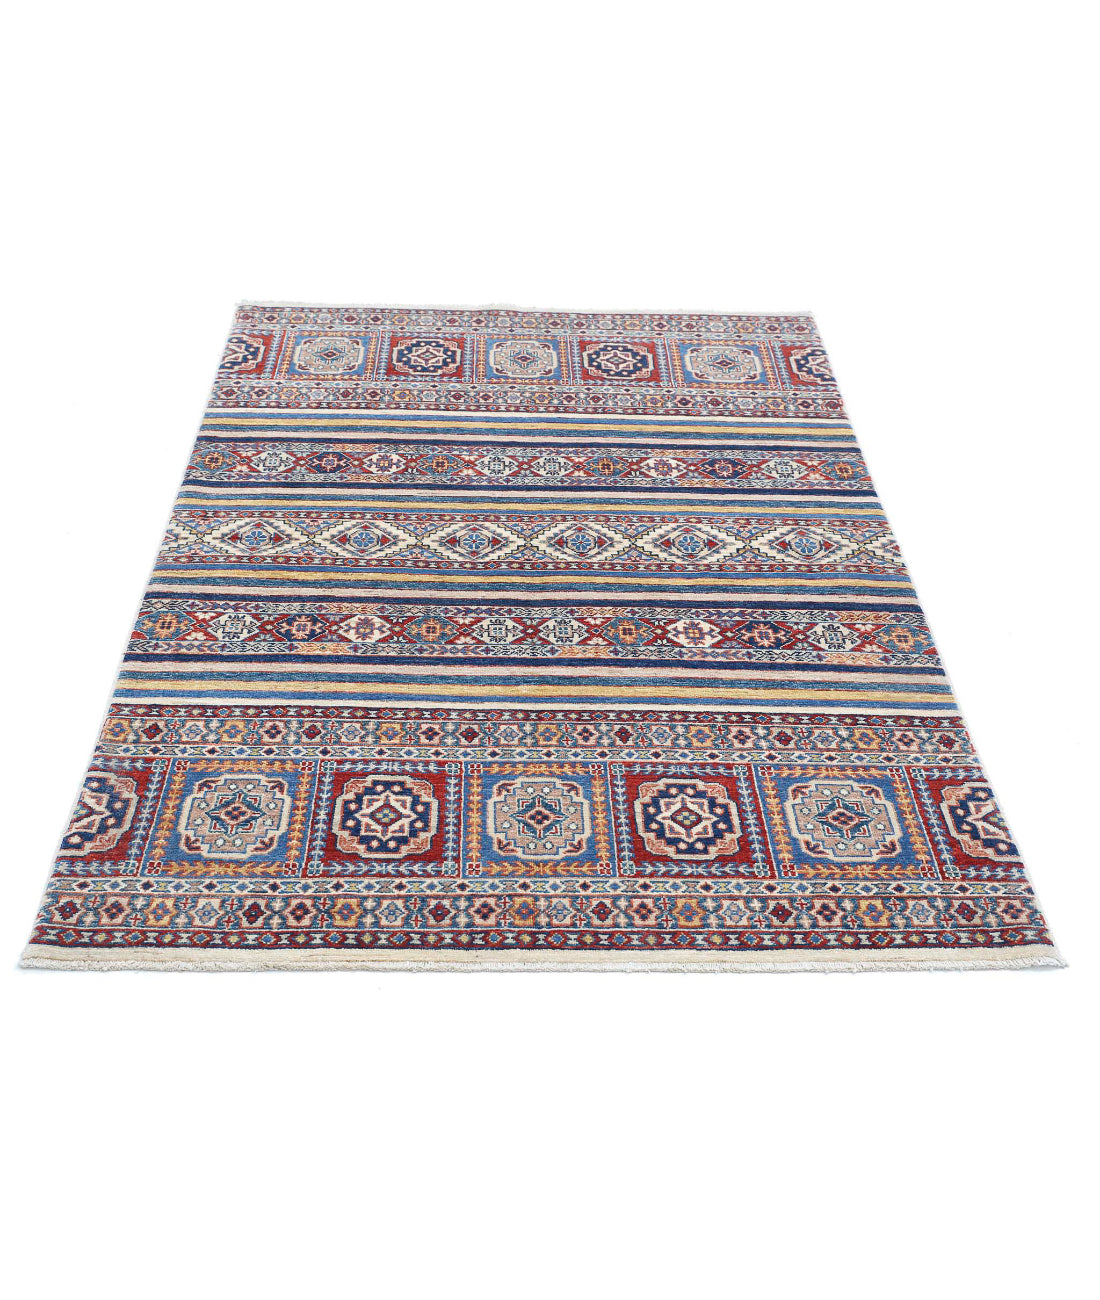 Hand Knotted Khurjeen Wool Rug - 4'0'' x 5'11'' 4'0'' x 5'11'' (120 X 178) / Multi / Multi